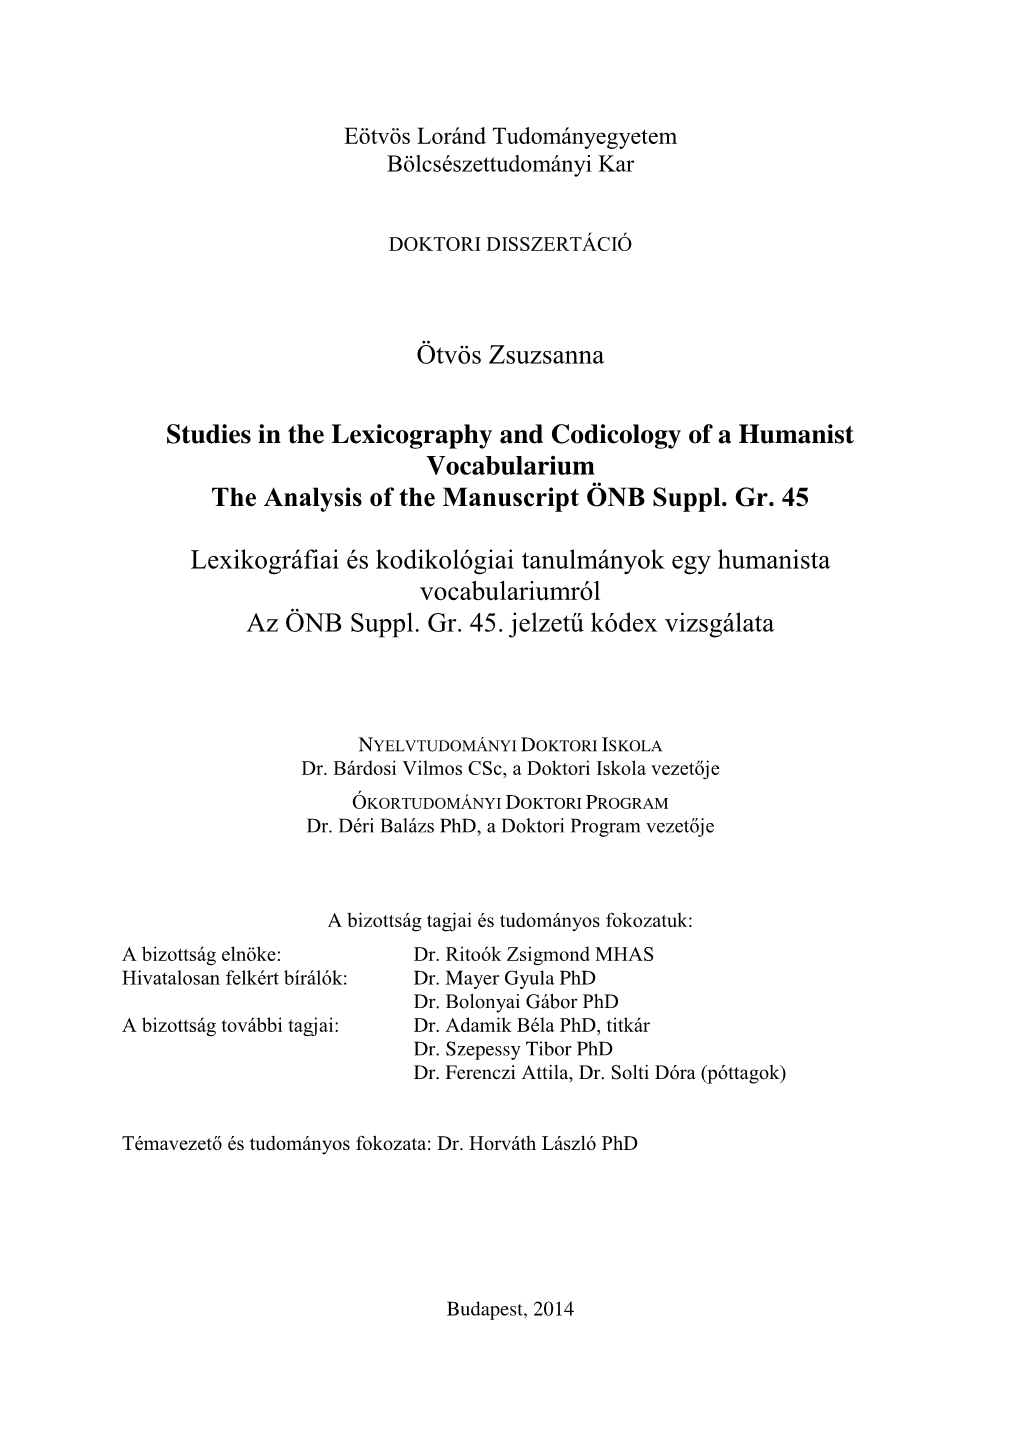 Ötvös Zsuzsanna Studies in the Lexicography and Codicology of A